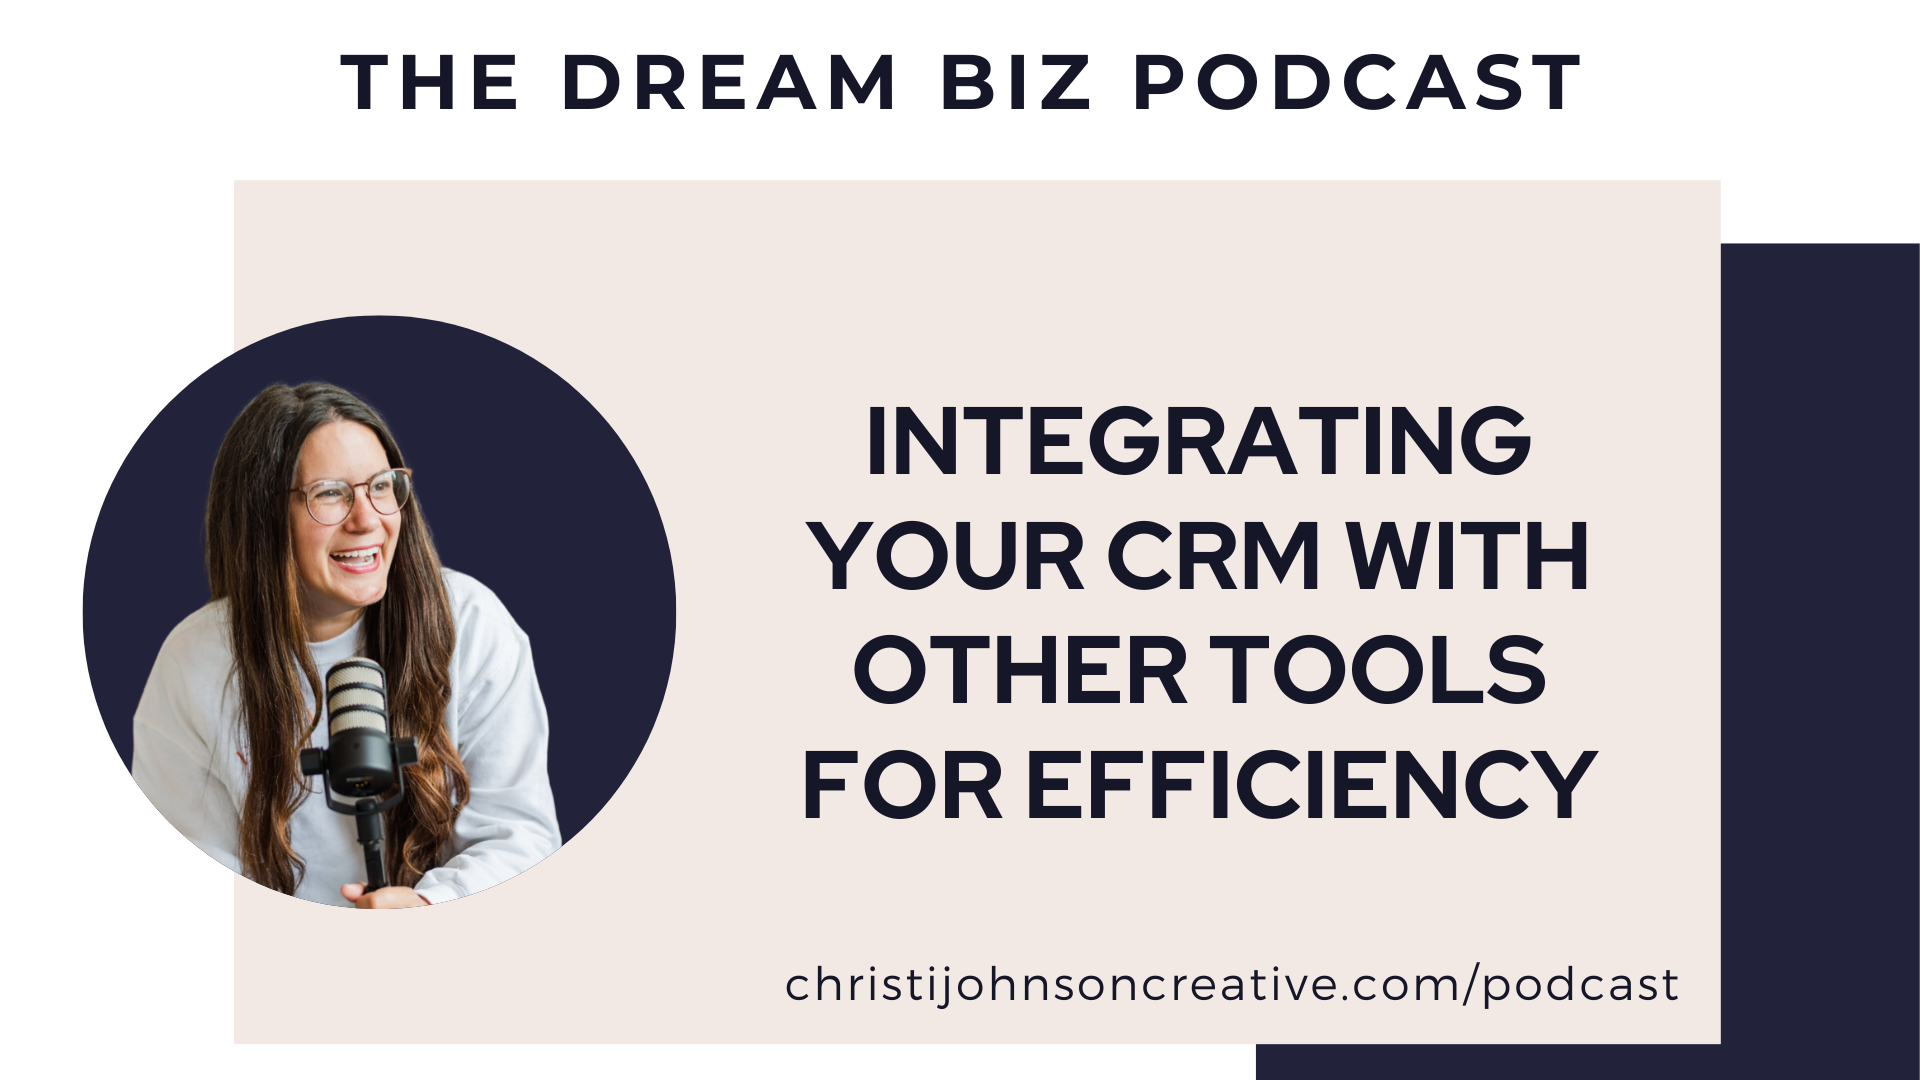 Christi, a white woman, is smiling off to the left while holding a microphone. The words Integrating Your CRM with other tools effectively are written on a tan background with purple letters.